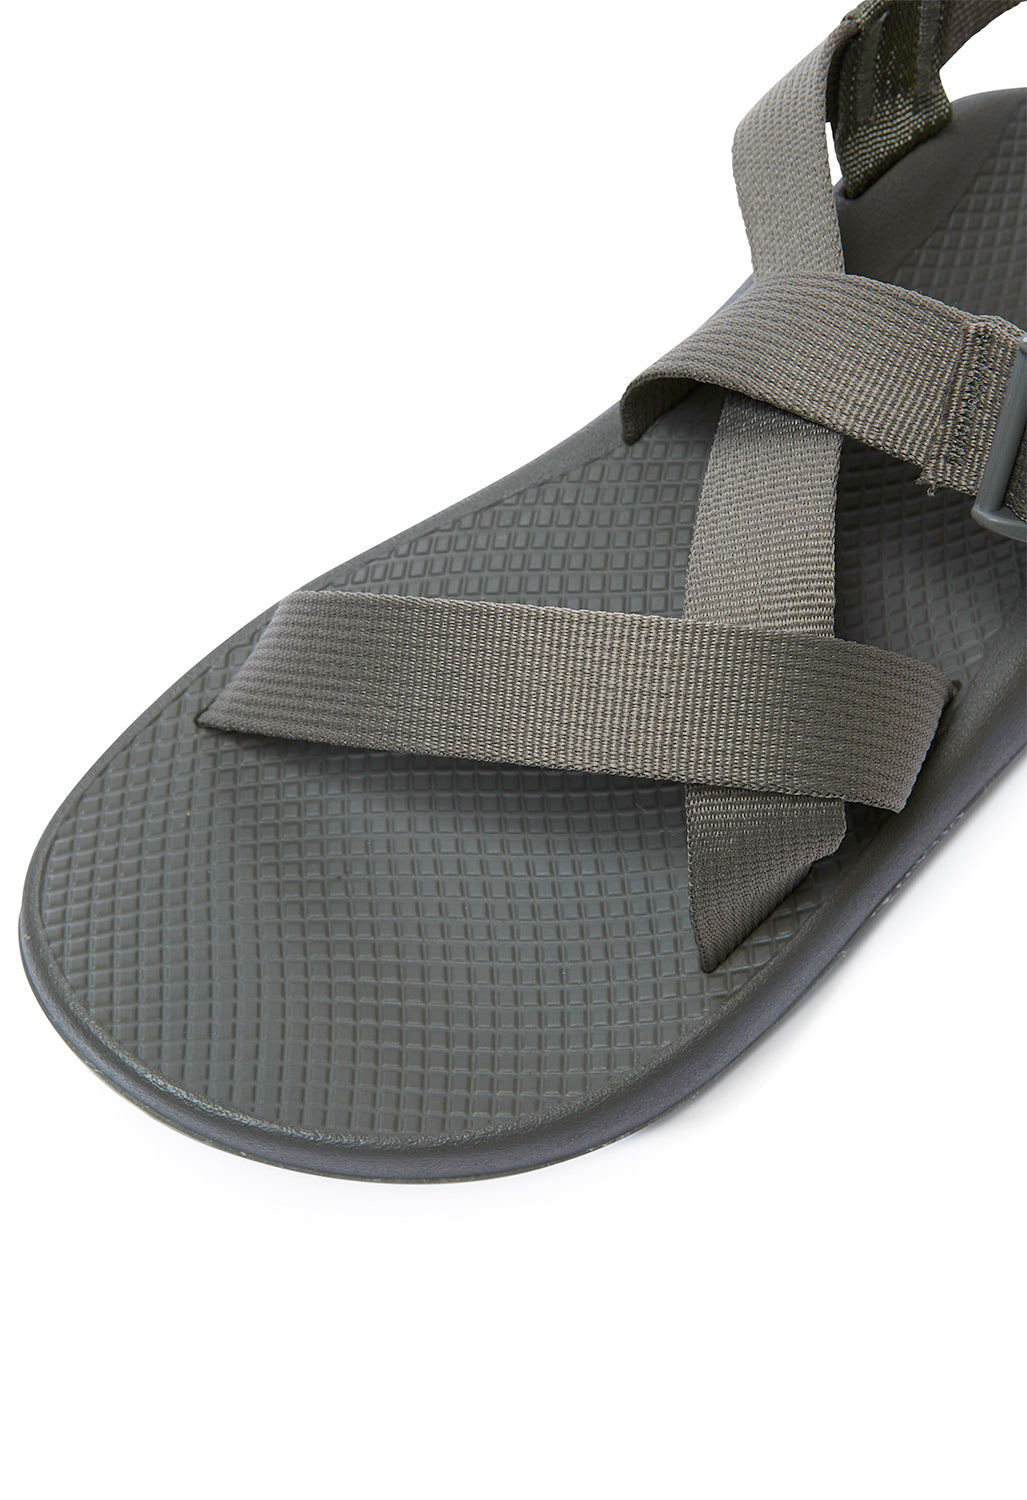 Chaco Z1 Classic Men's Sandals - Olive Night